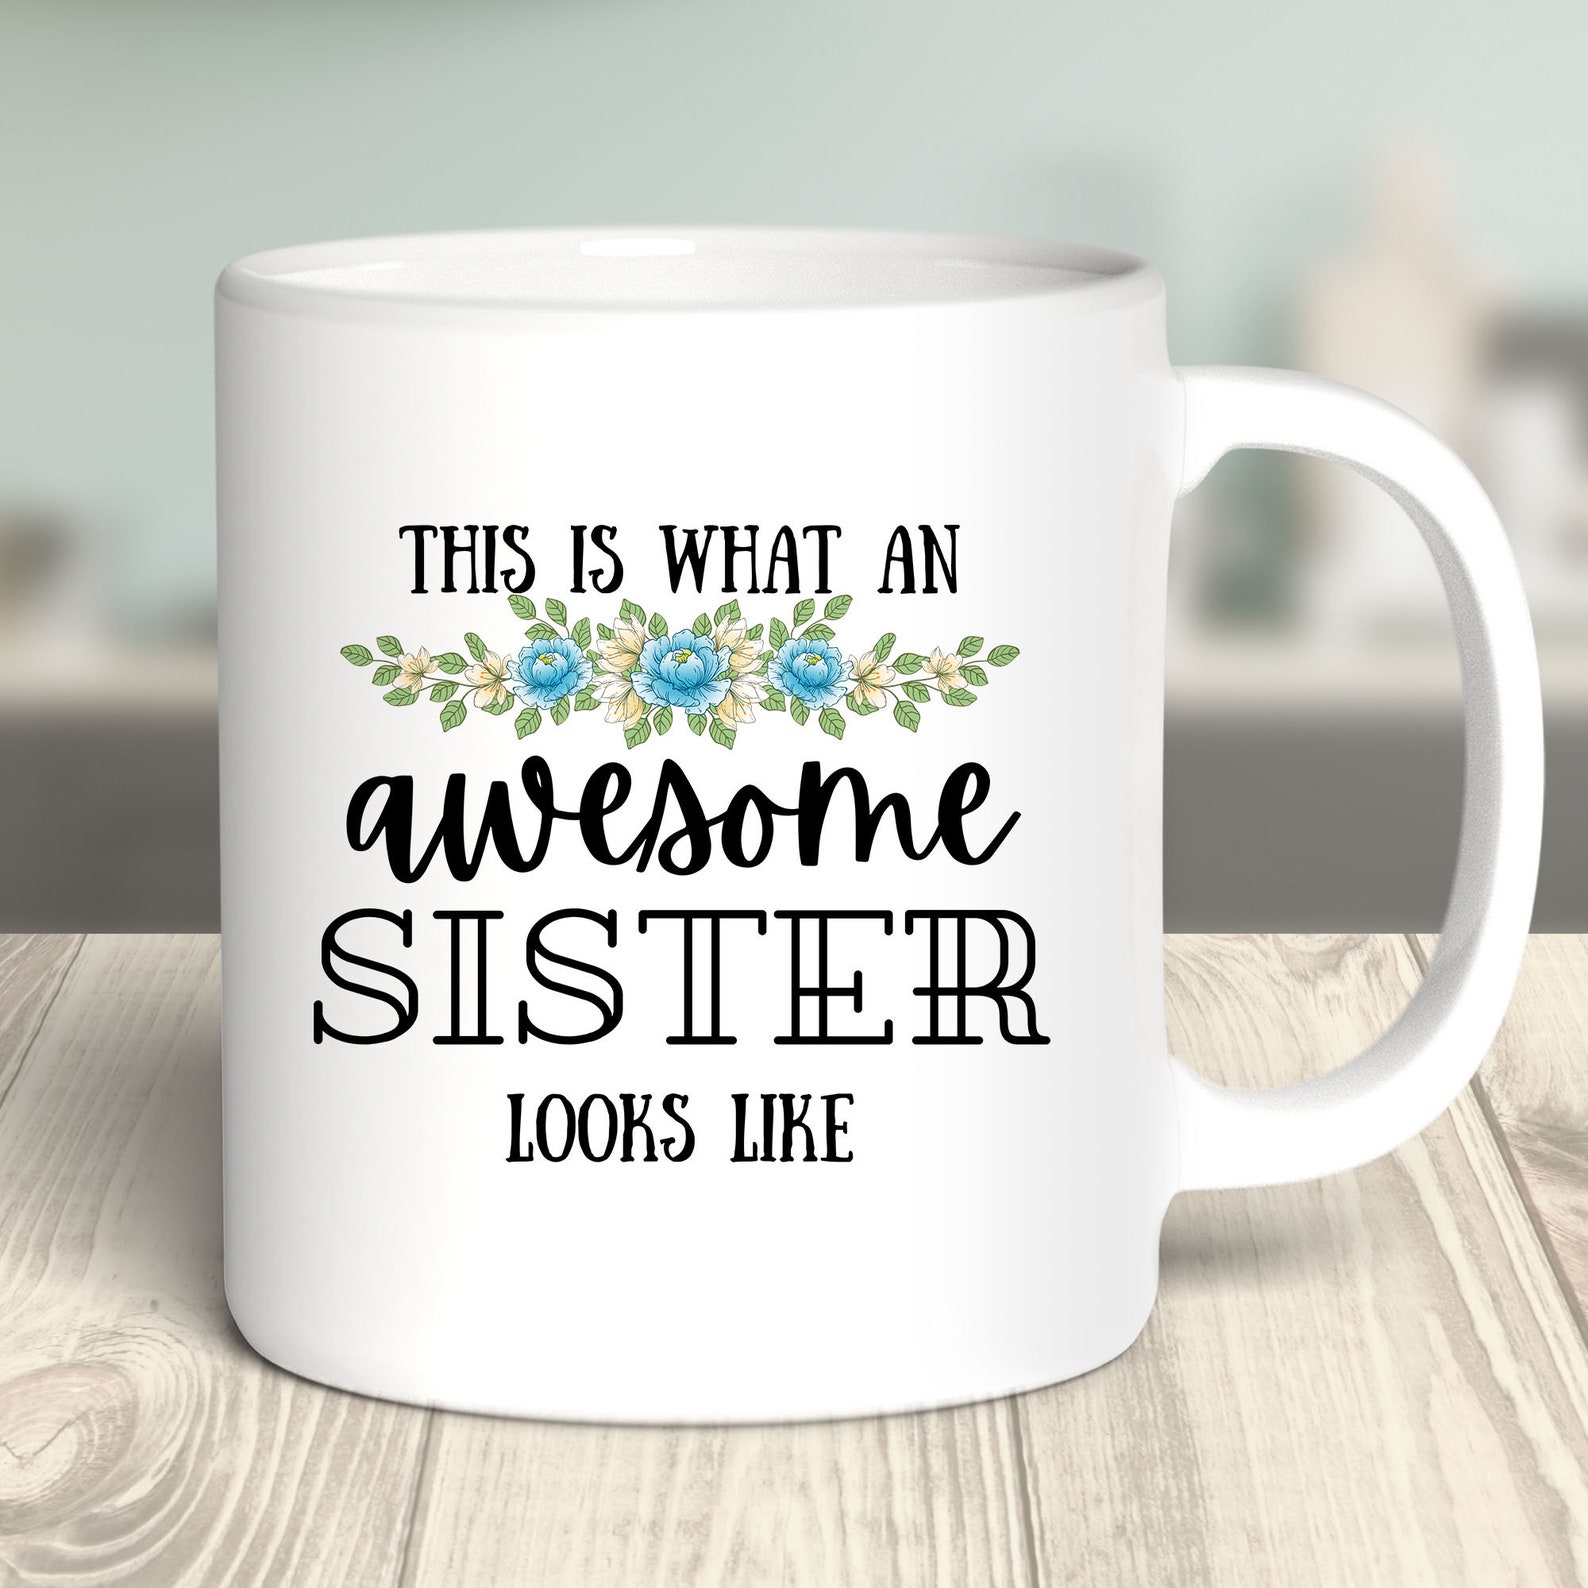 This is What an Awesome Sister Looks Like Mug Cup Birthday Christmas Present 